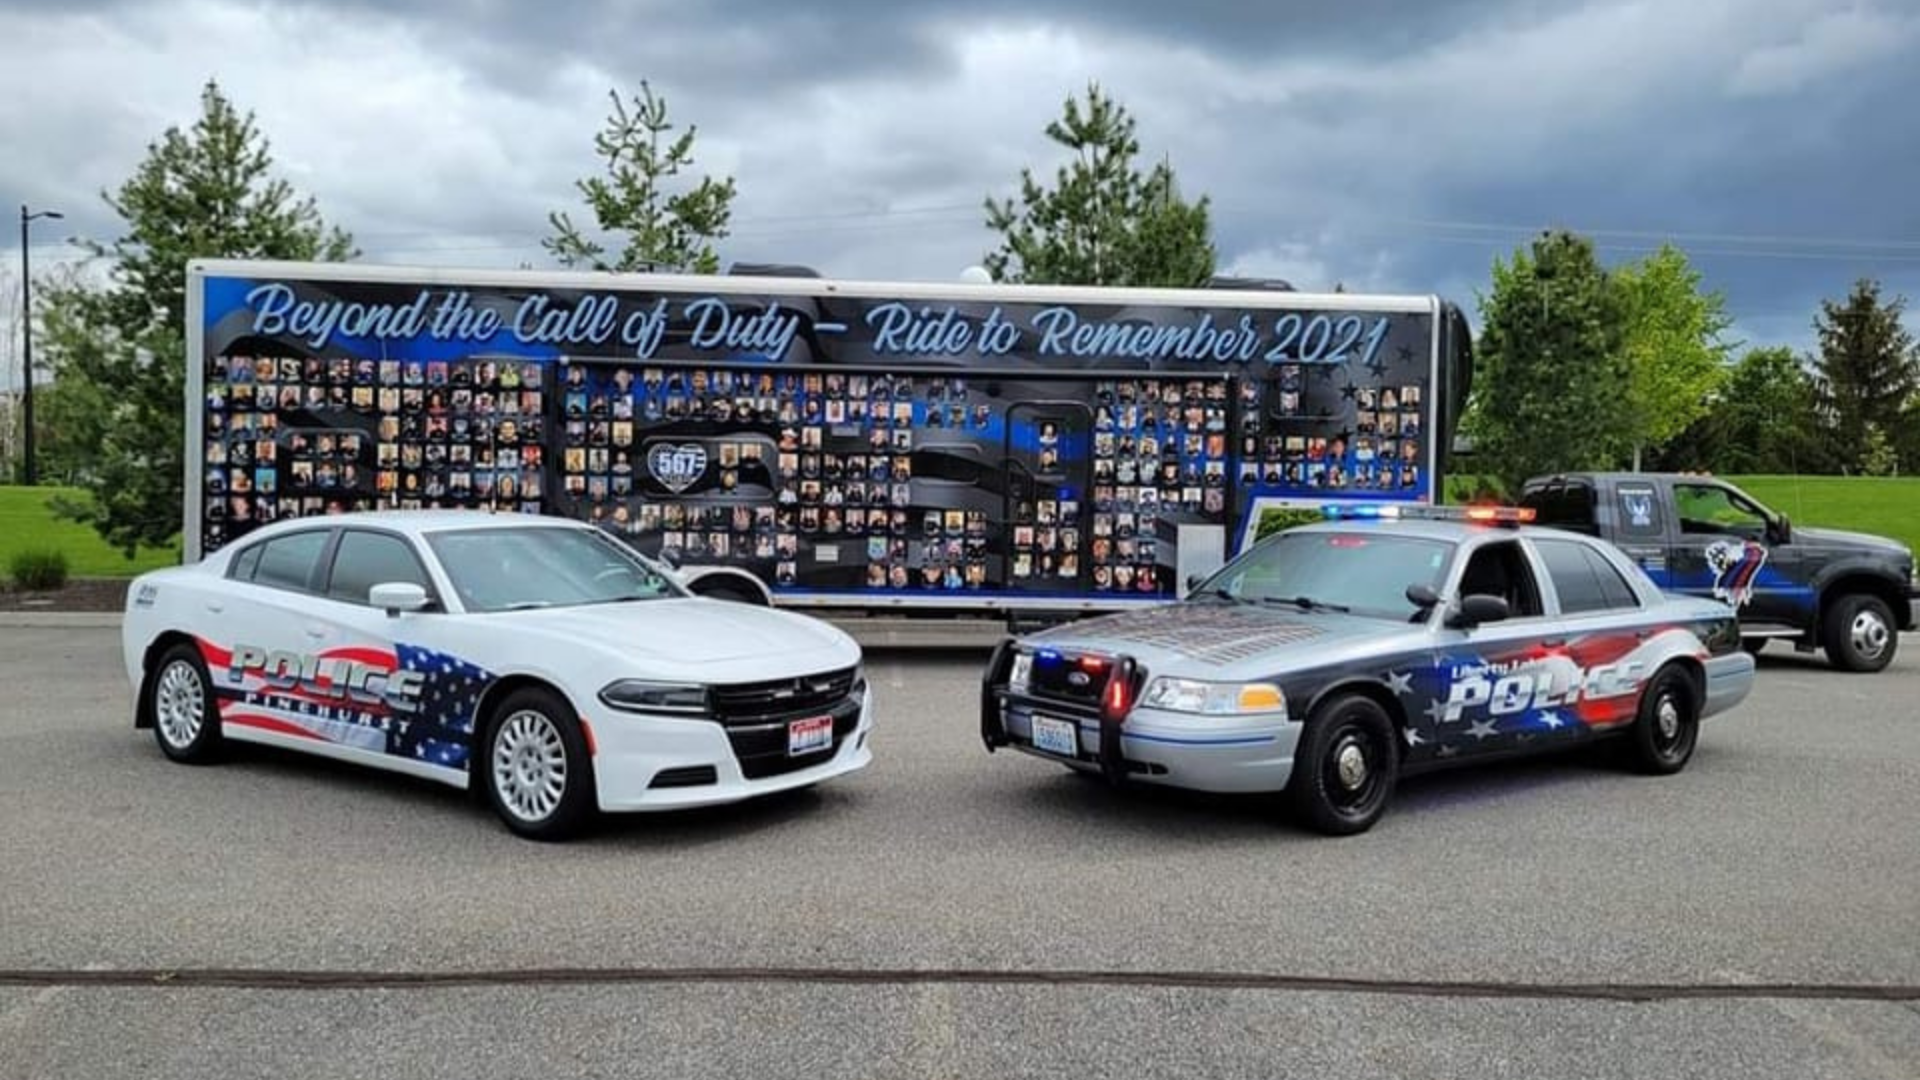 A wide shot featuring two police vehicles, one from Liberty Lake Police, in front of a trailer displaying photos and names of officers lost in the line of duty, titled "Beyond the Call of Duty – Ride to Remember 2021.